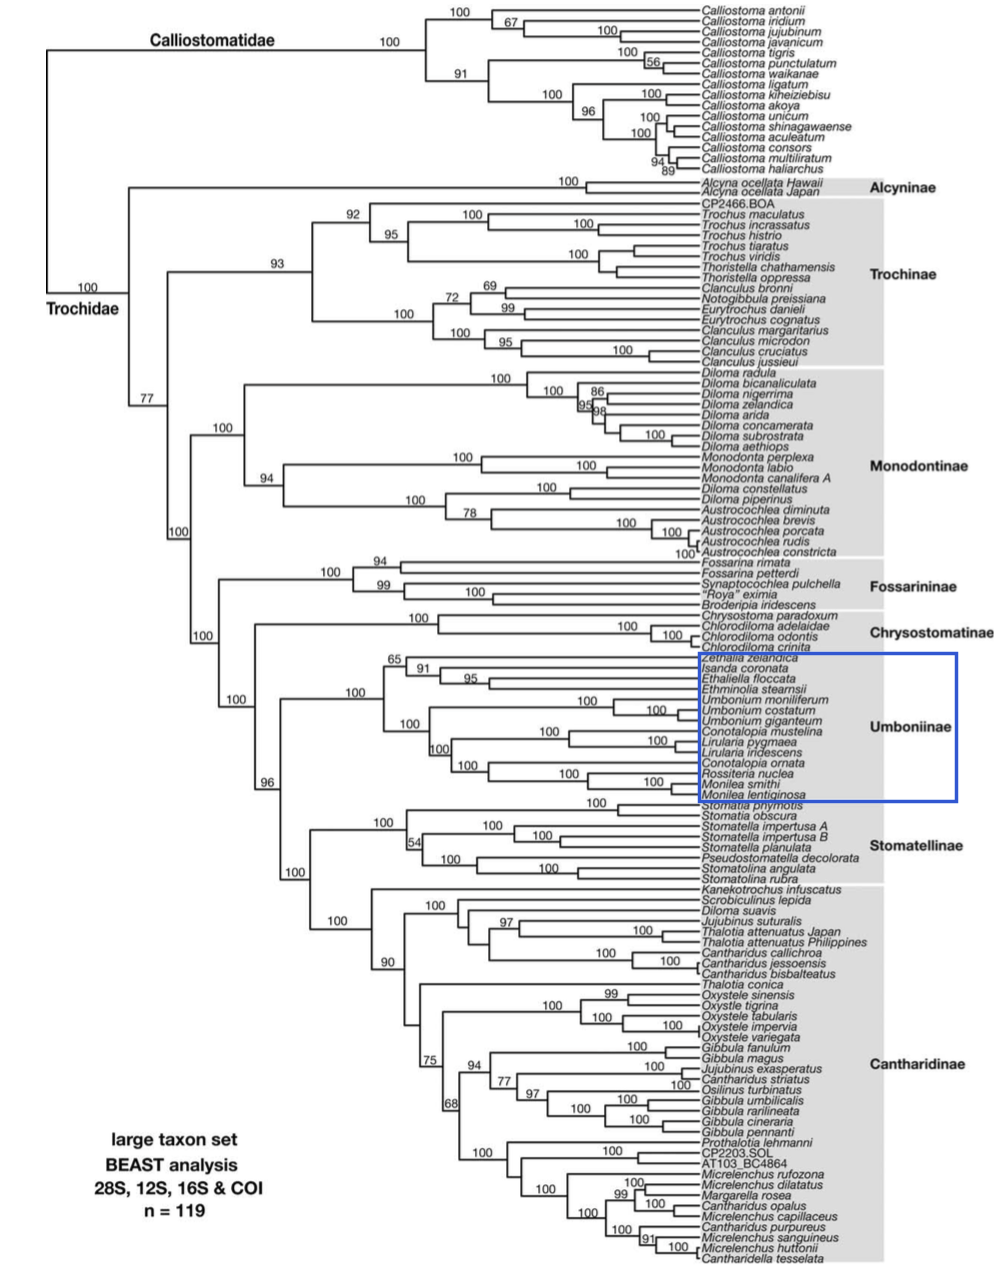 phylogeny copy.png